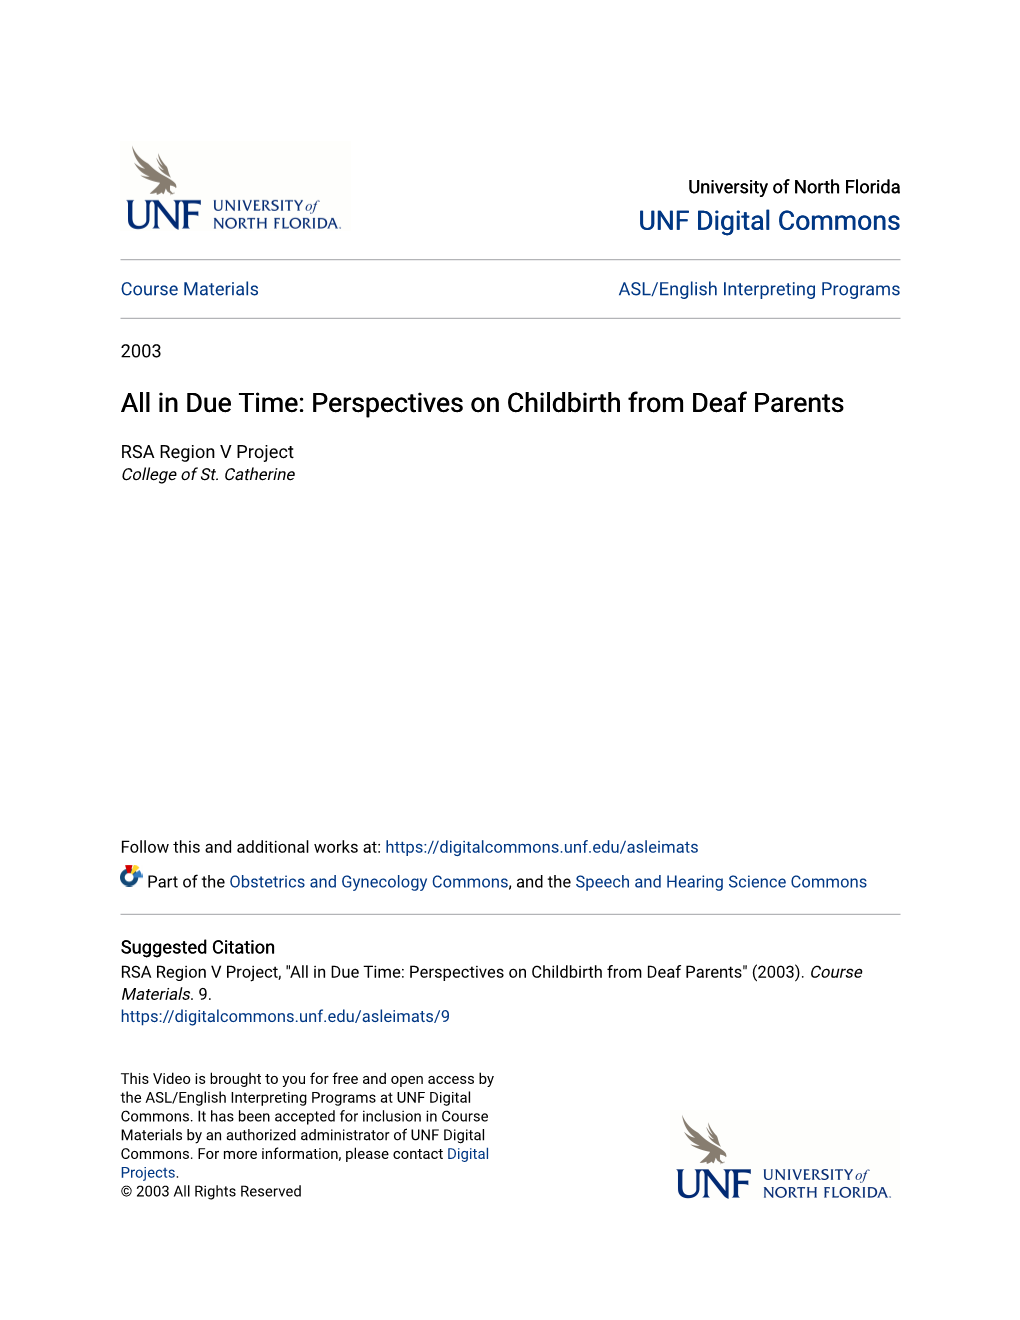 In Due Time: Perspectives on Childbirth from Deaf Parents